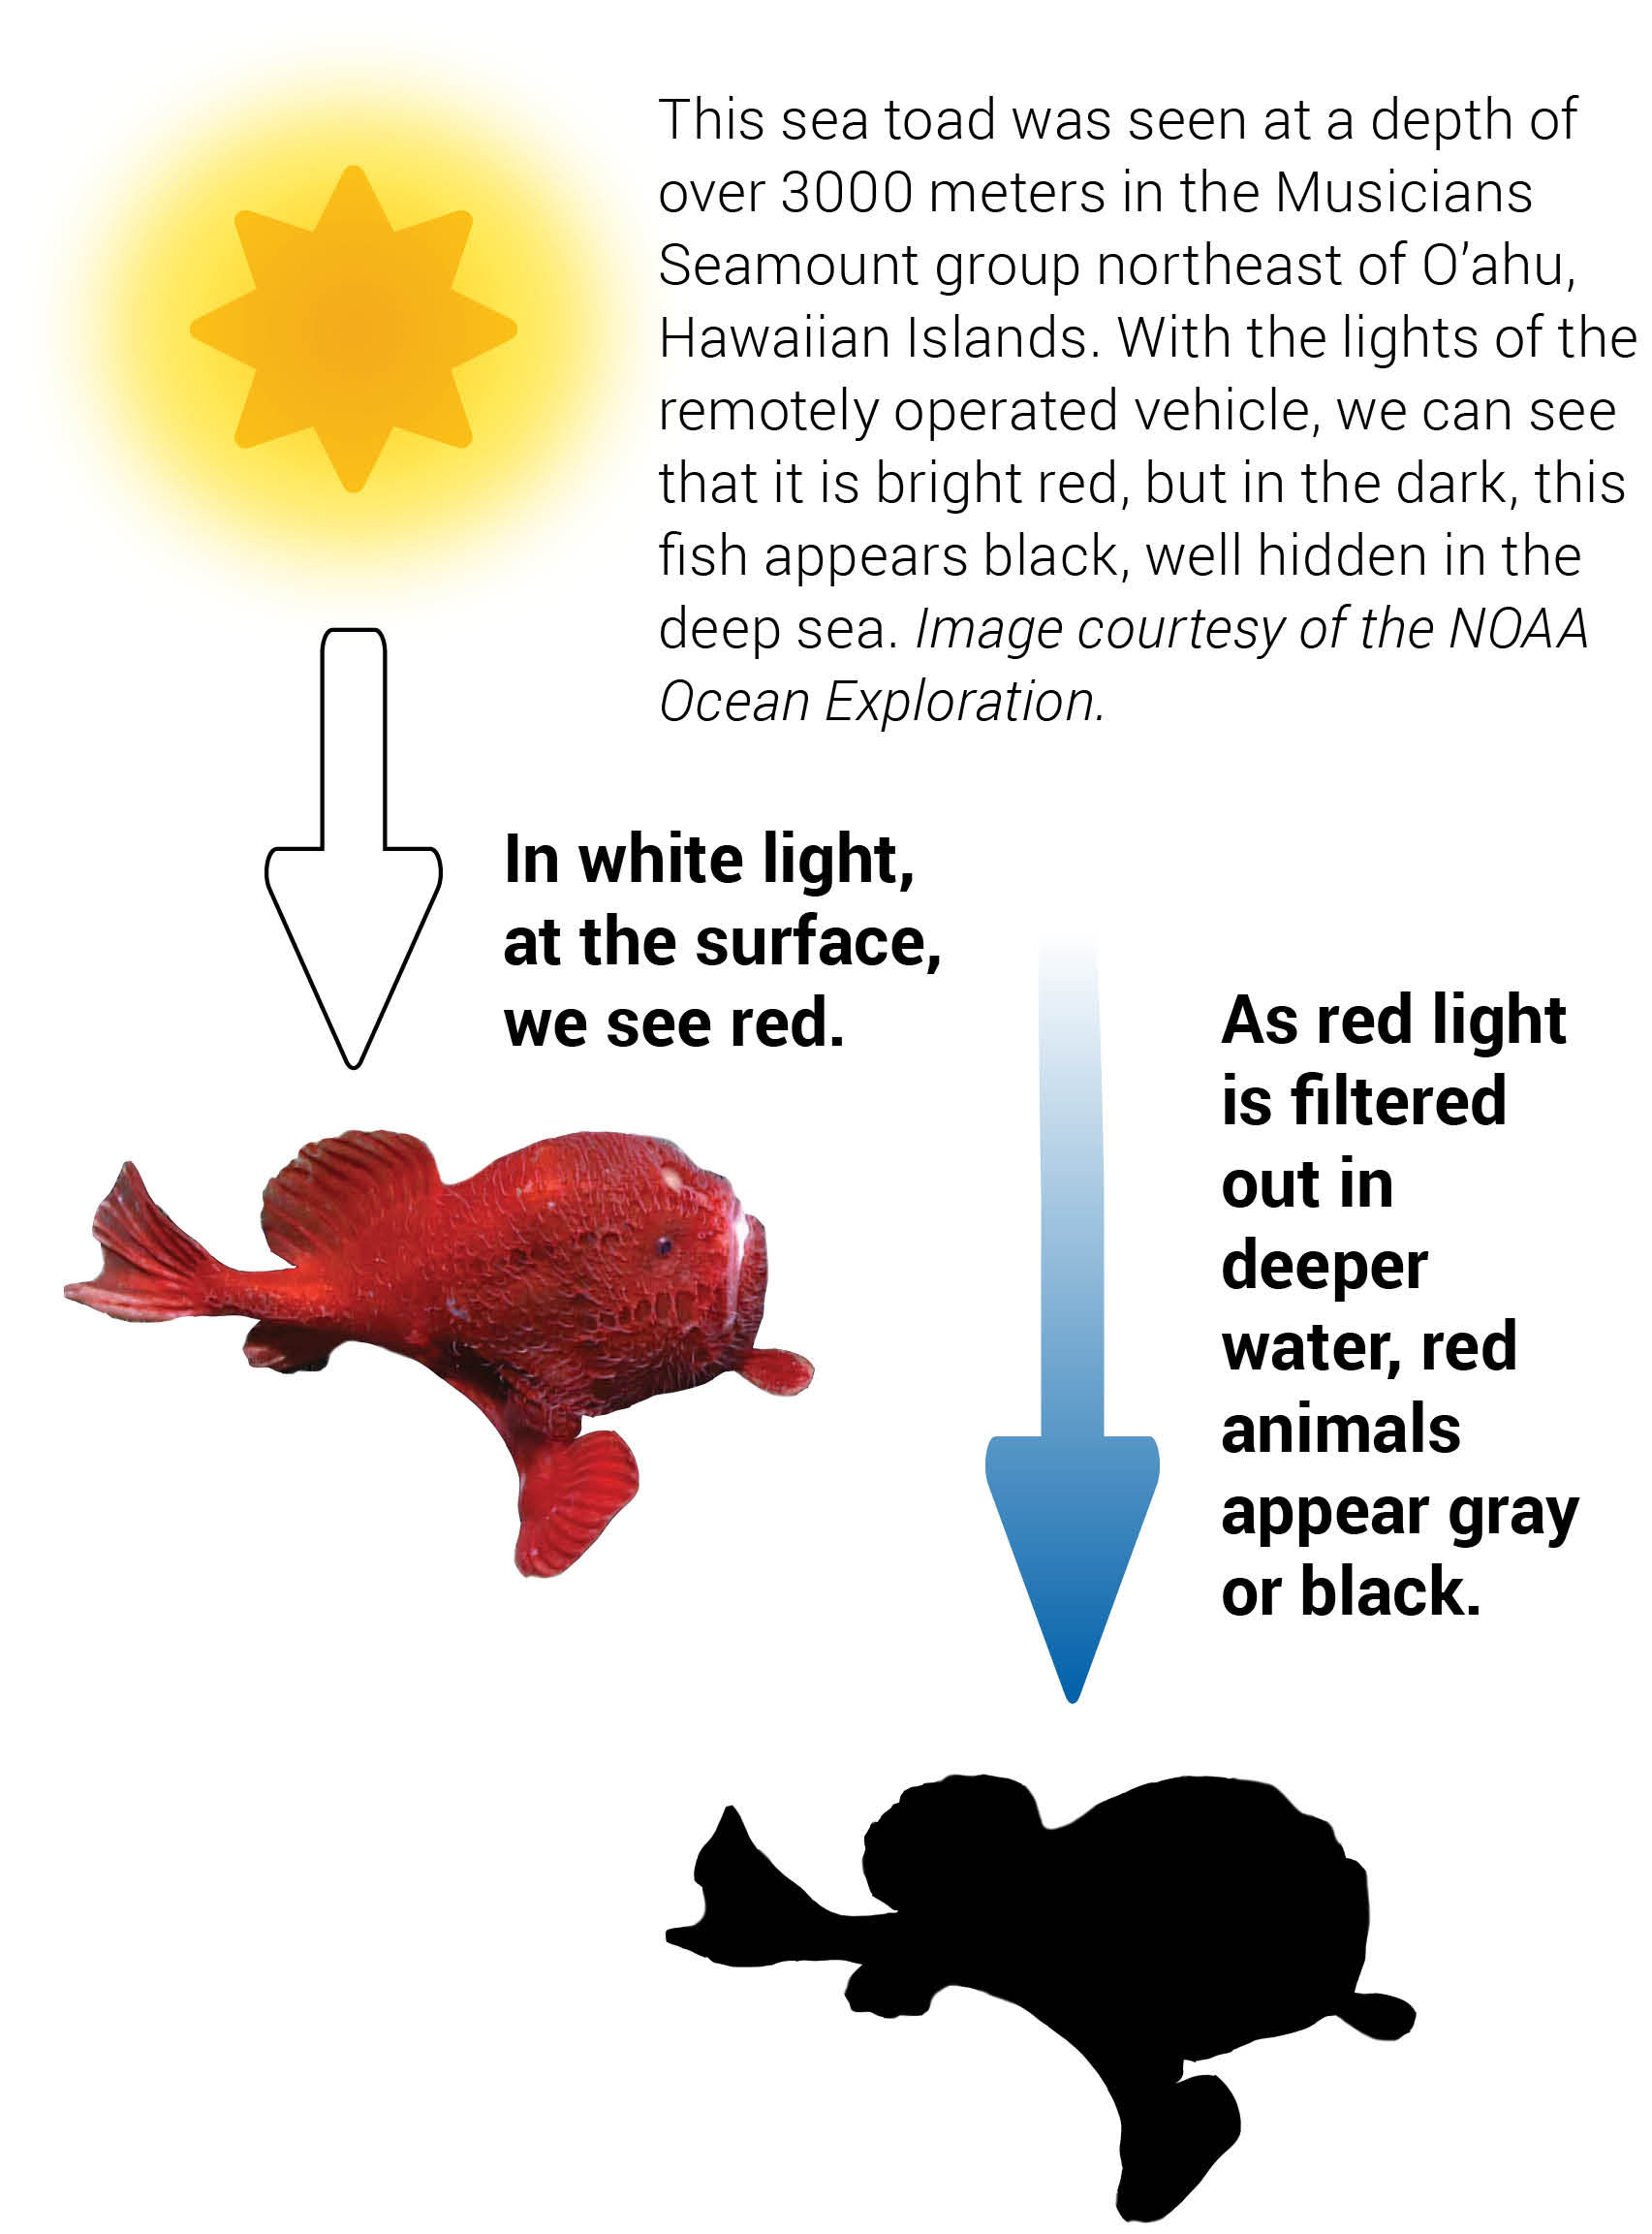 As one travels from surface waters to deeper waters, the amount and visible colors of light change, because water refracts, absorbs, and scatters wavelengths differently. Red light disappears at a shallower depth in the water column and blue light penetrates deepest. This affects how different colored pigments appear at different depths.